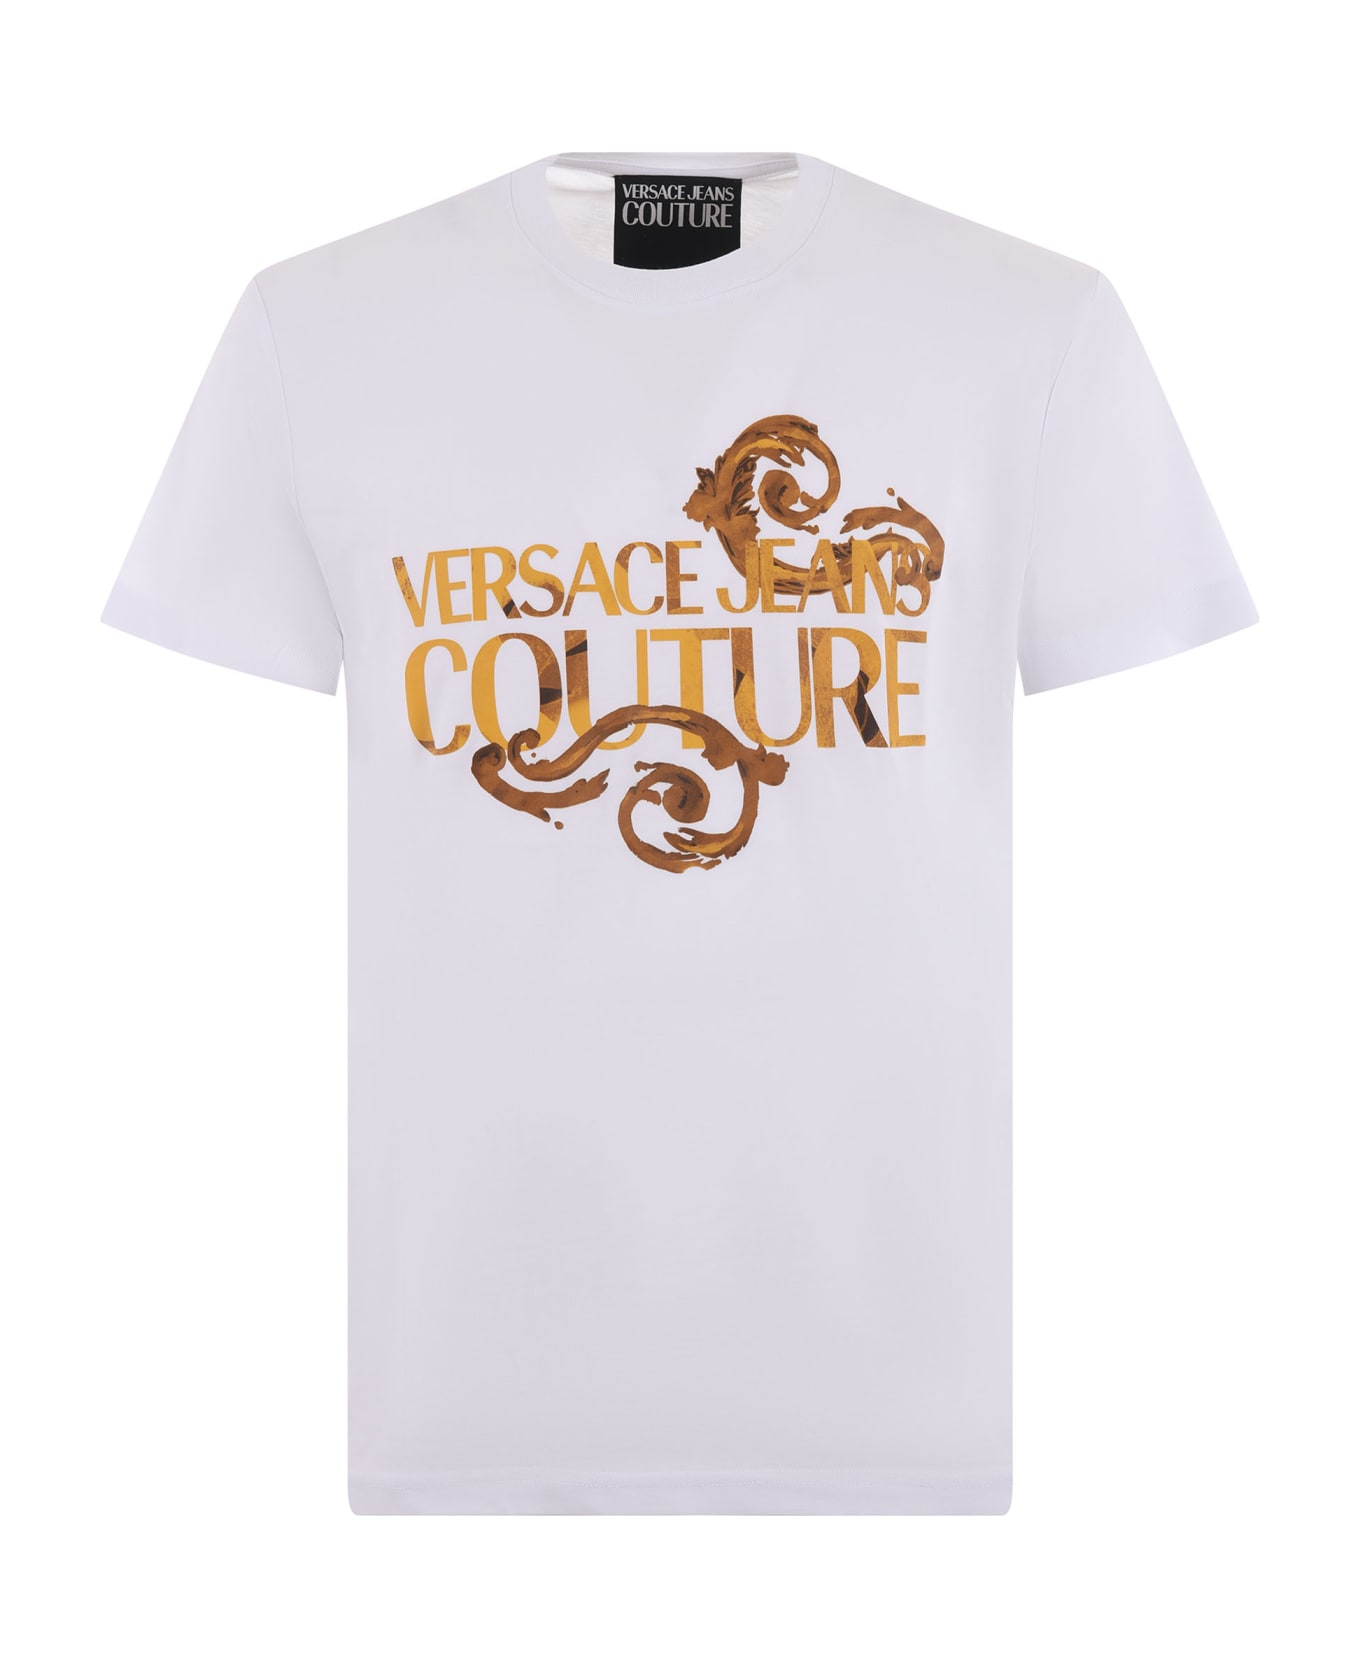 Versace Jeans Couture Printed T-shirt Versace Jeans Couture - Bianco/oro シャツ